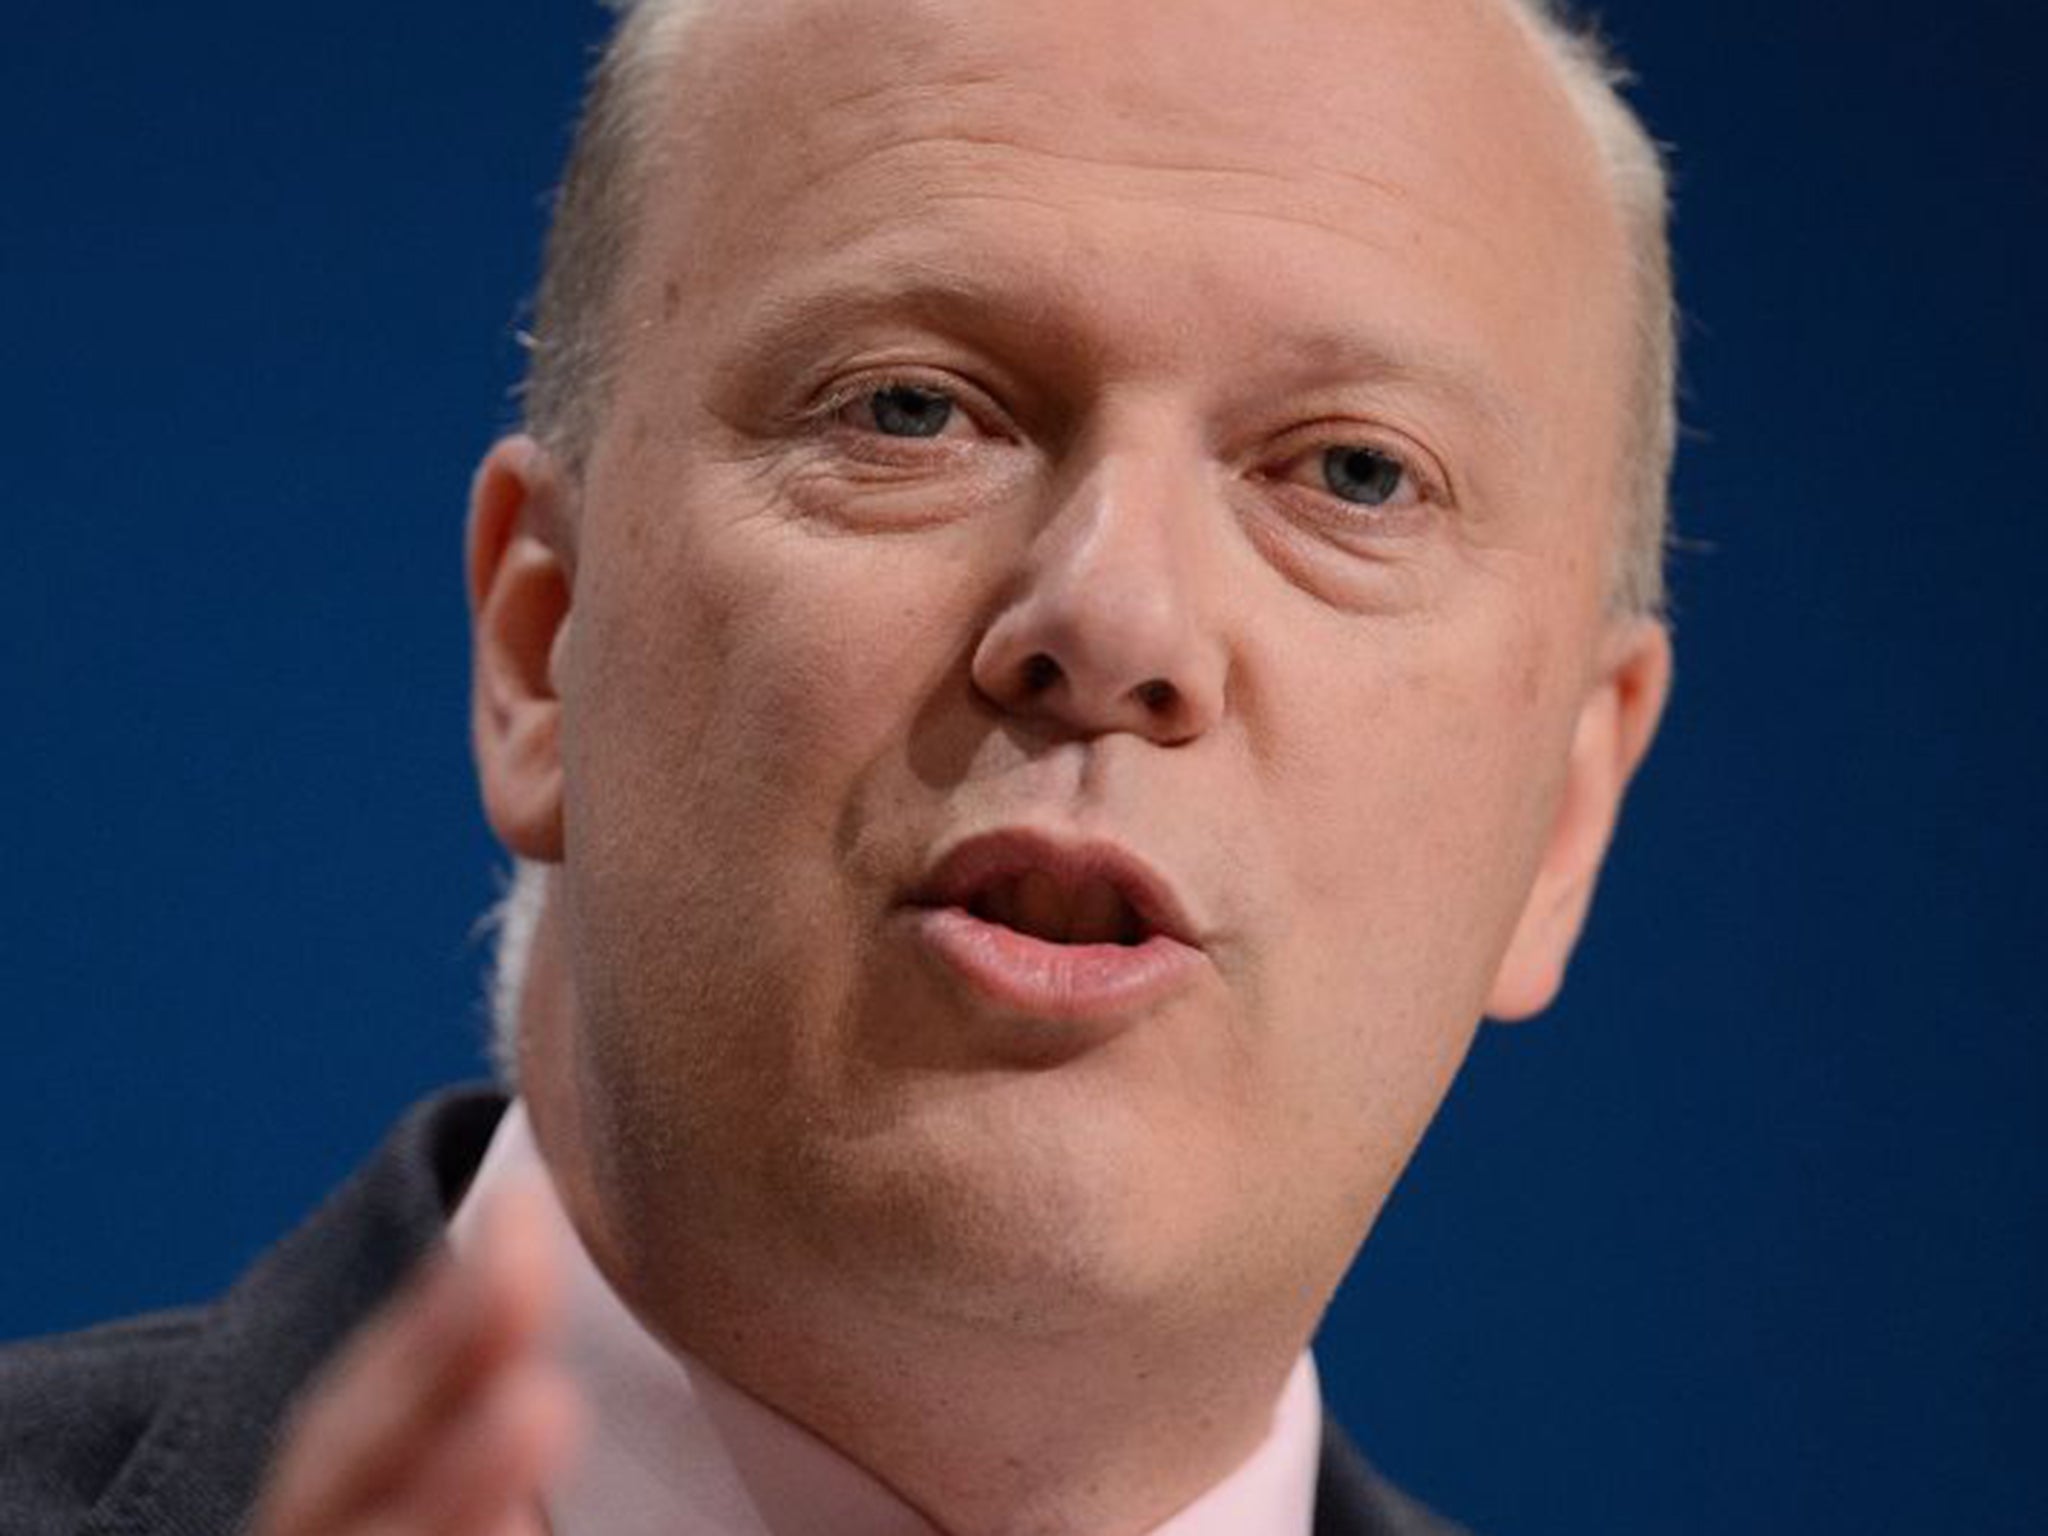 Chris Grayling said the Tories were giving the English more say over their own destiny